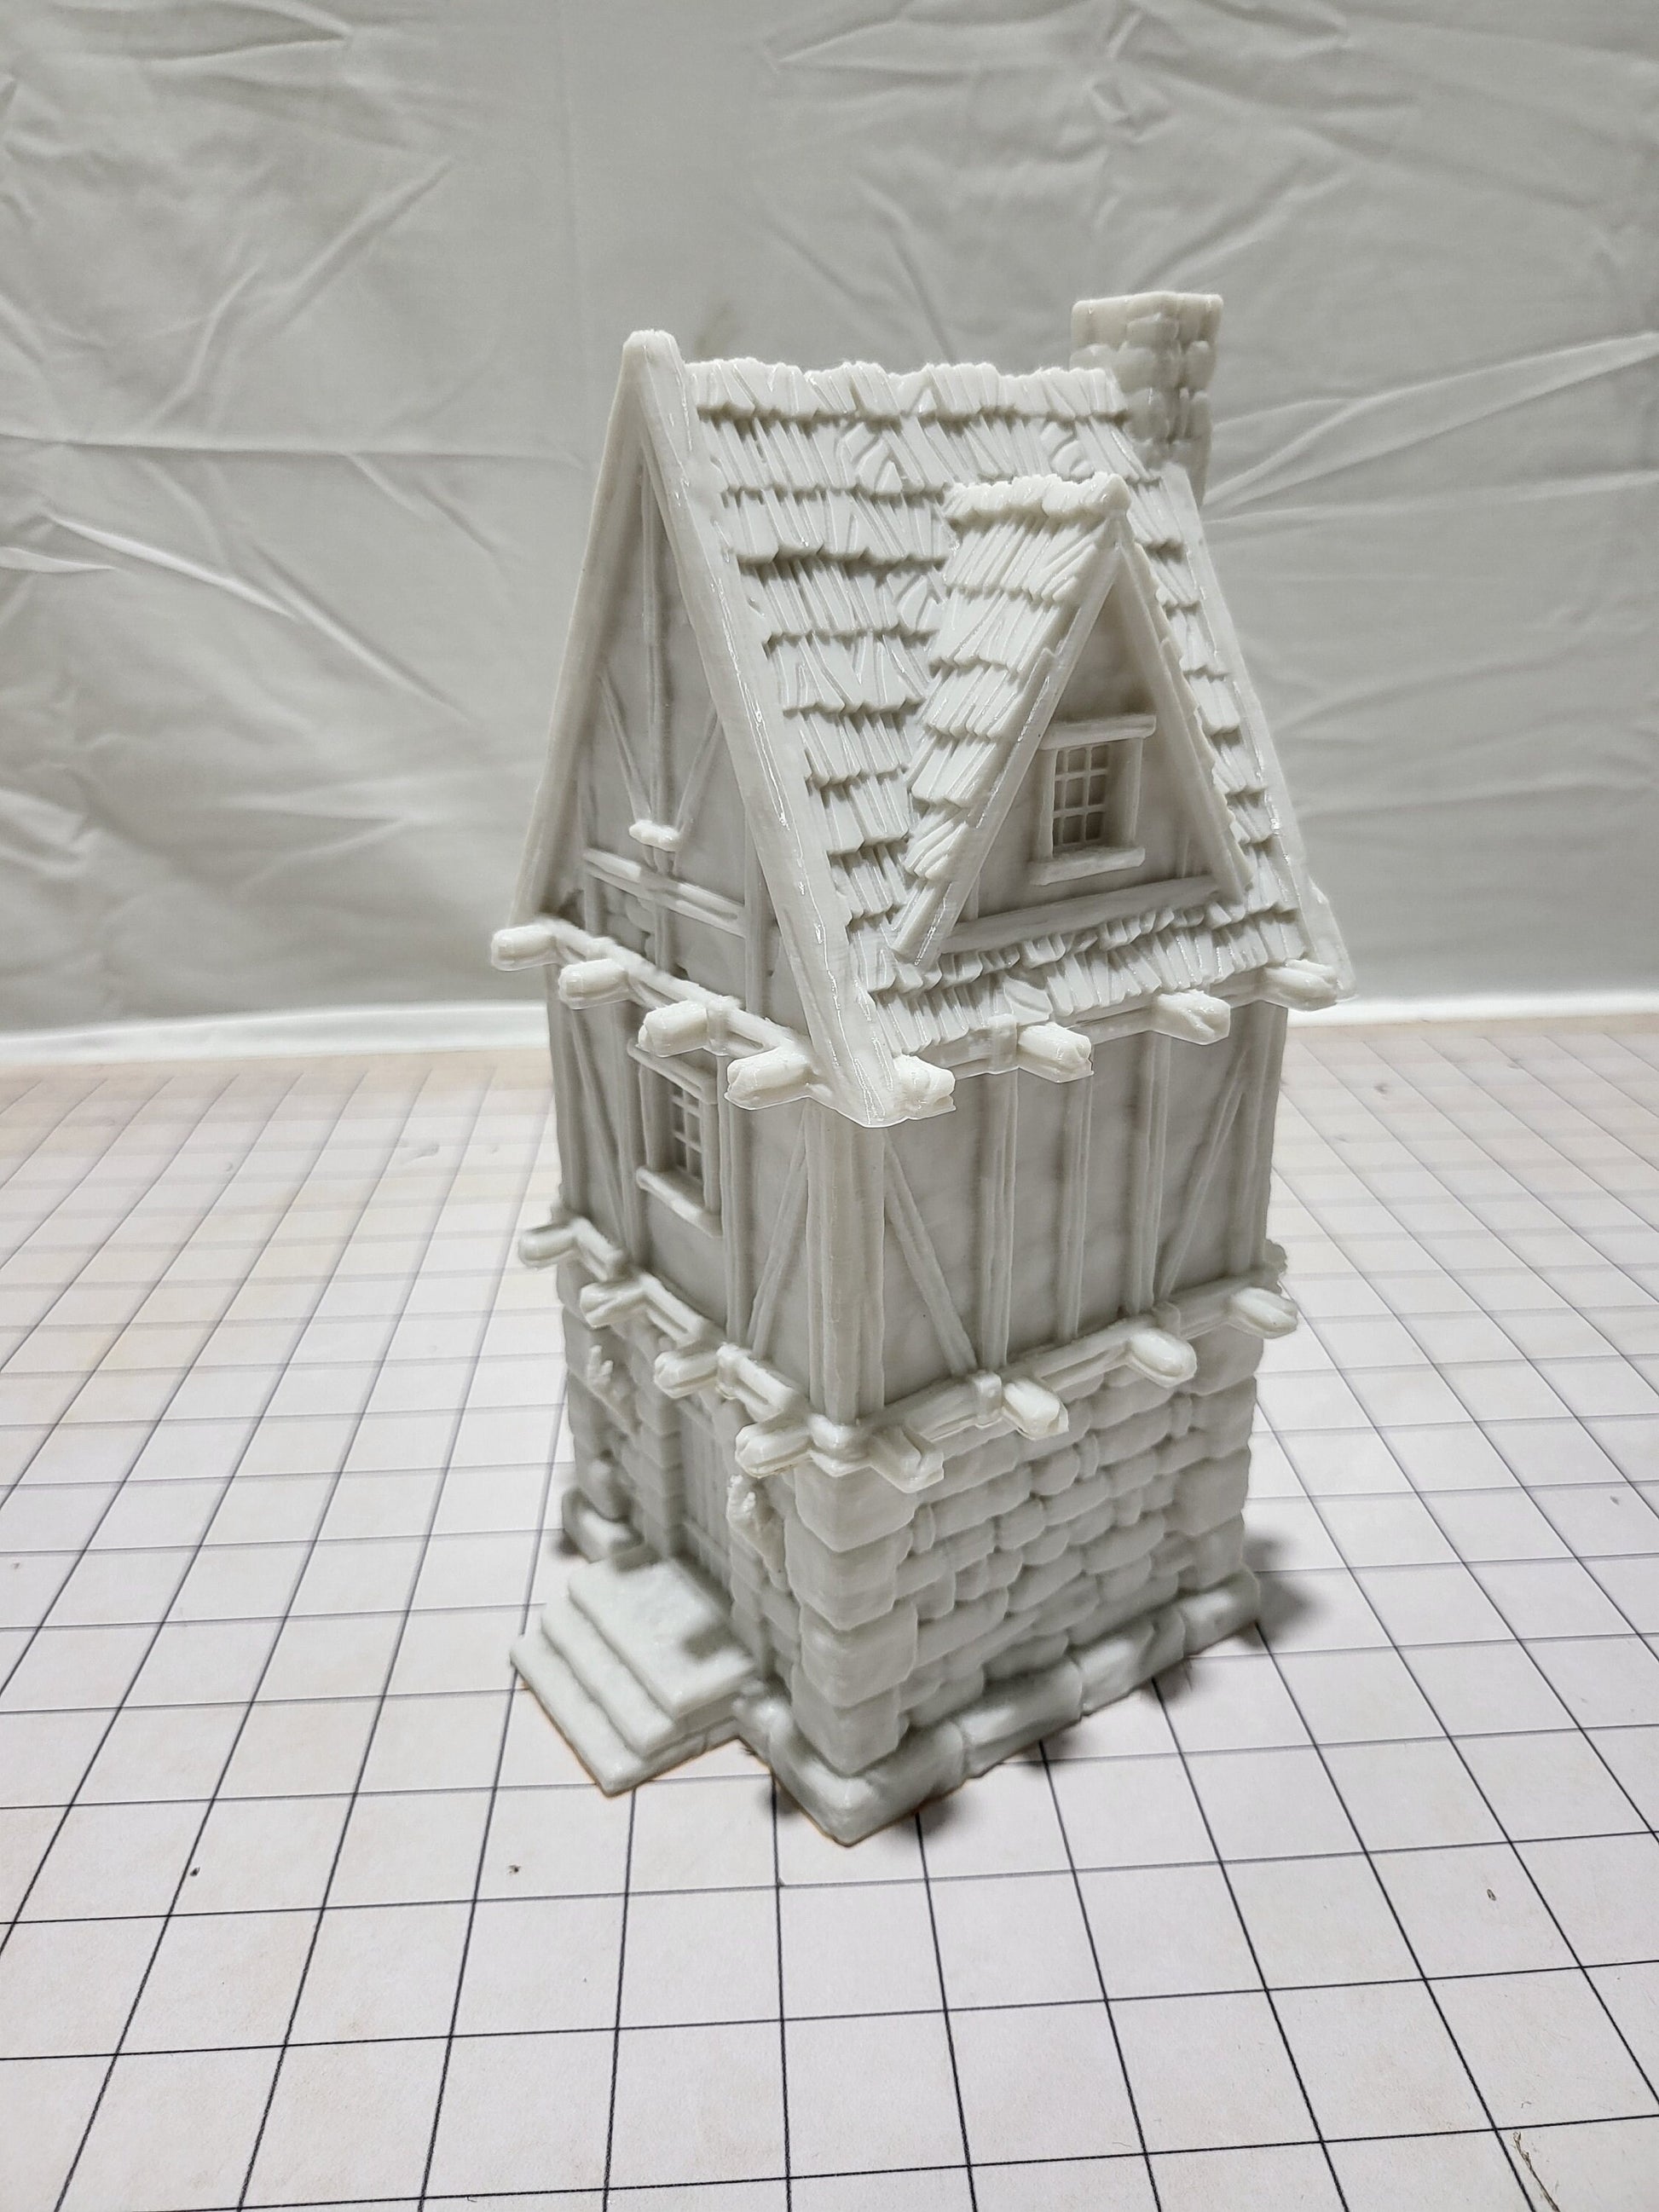 Stormhill Tower House, Tabletop Gaming, 28mm Scale, Stormhill City, city set, dungeons and dragons